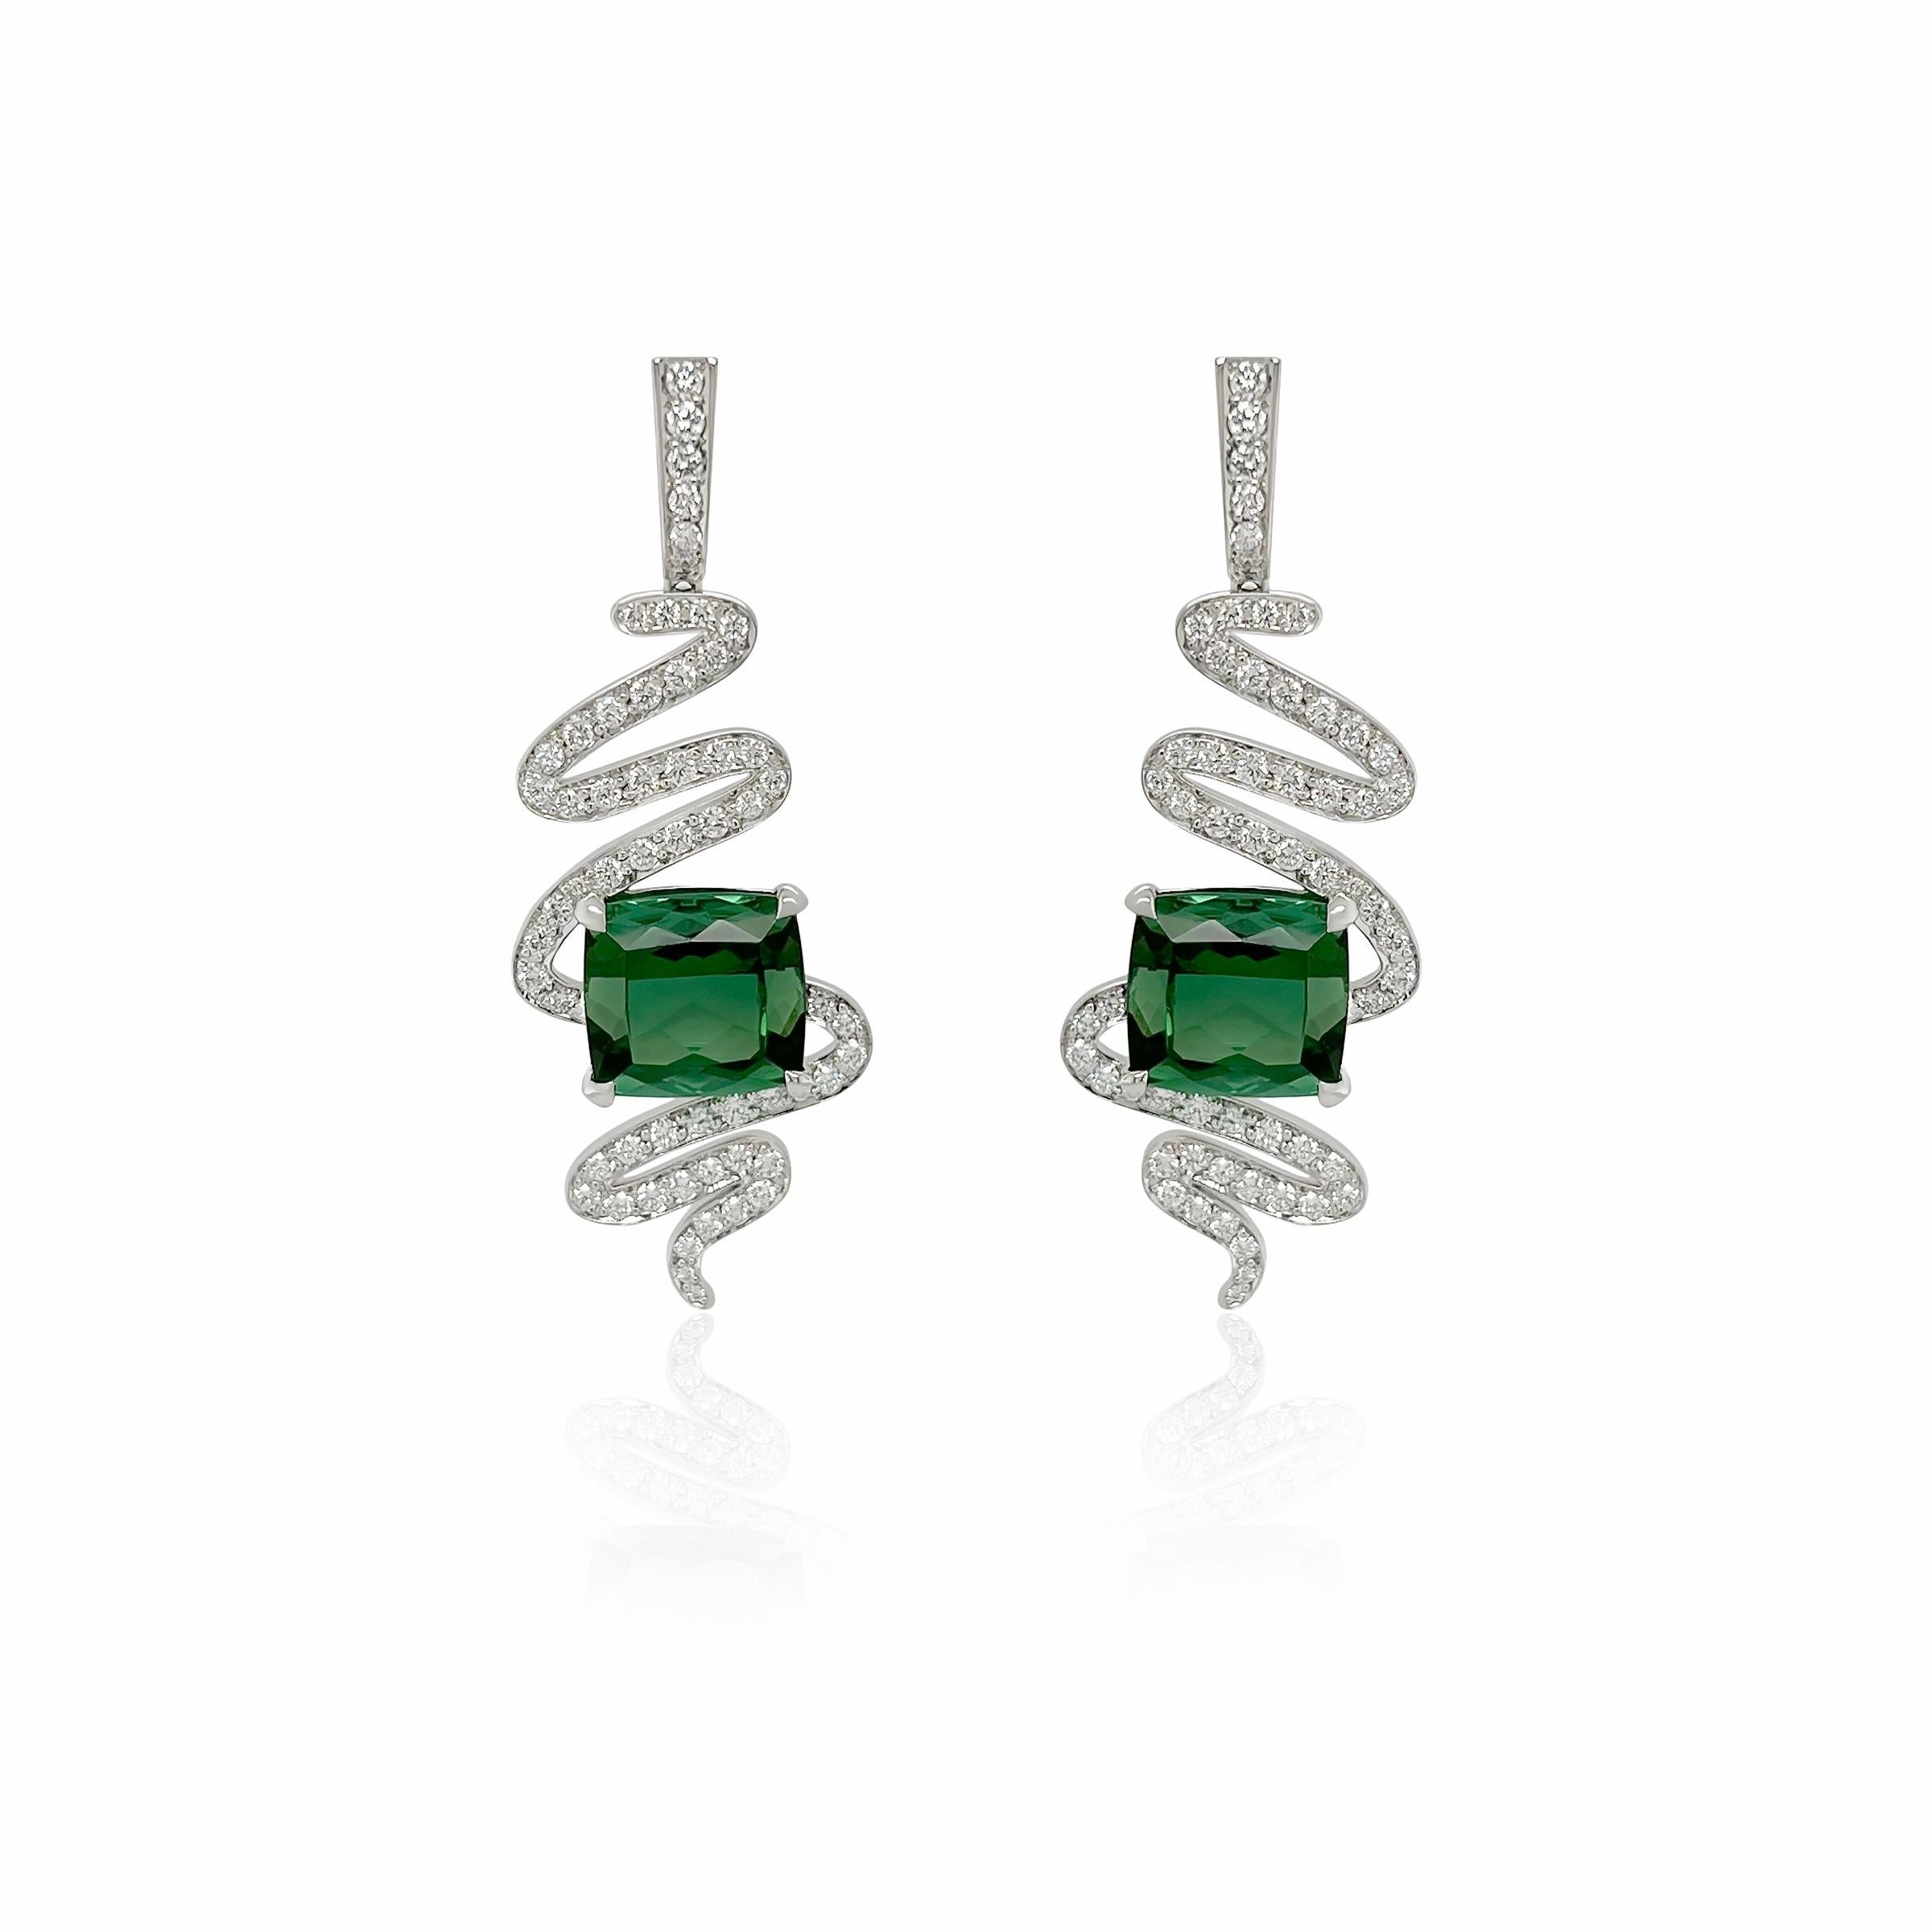 These earrings showcase the breathtaking beauty of vivid Brazilian green tourmalines. These gemstones weight 6.14 cts (10.86 mm x 10.28mm ) and 6.85 cts ( 10.88mm x 10.68 ) and are specially cut making them truly unusual. Their rich, natural color